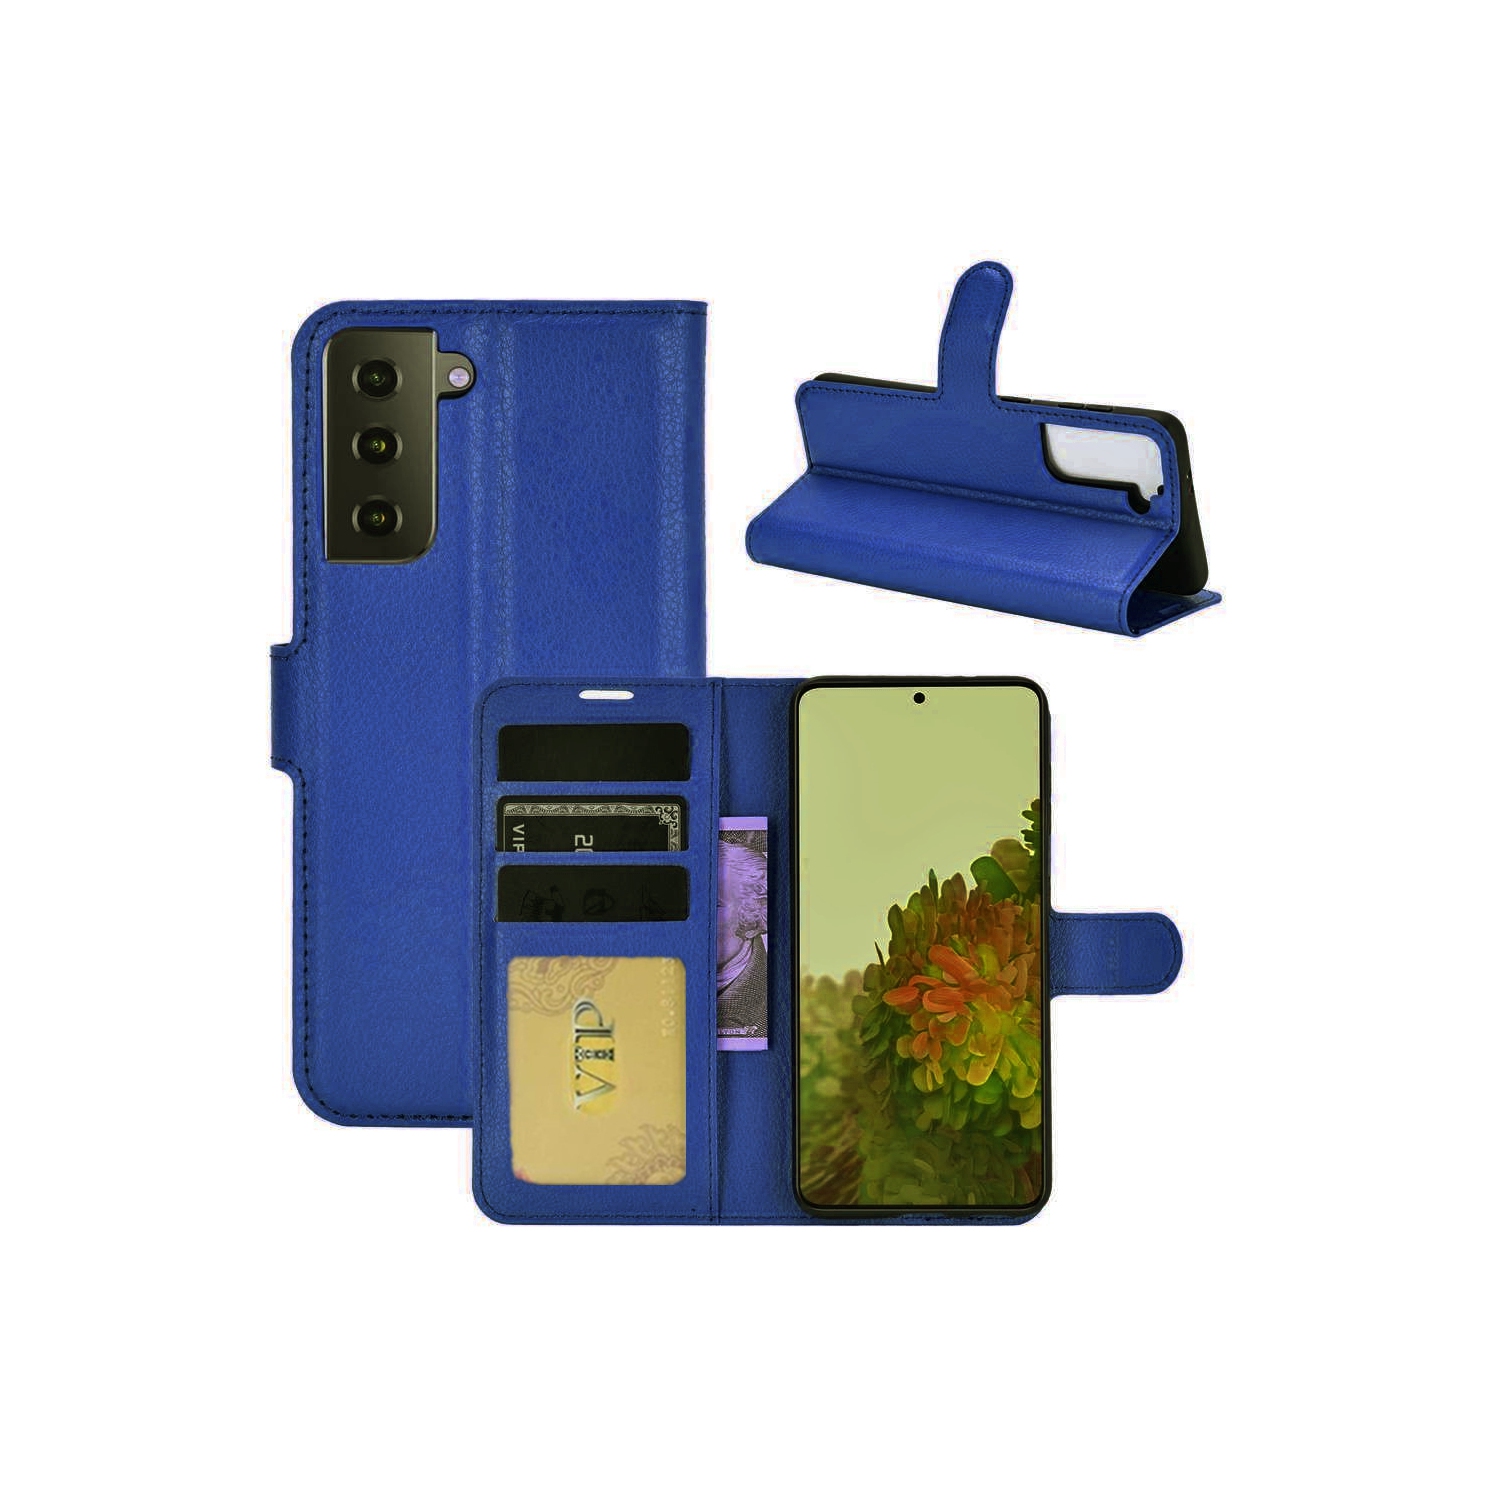 【CSmart】 Magnetic Card Slot Leather Folio Wallet Flip Case Cover for Samsung Galaxy S21 5G 6.2", Navy